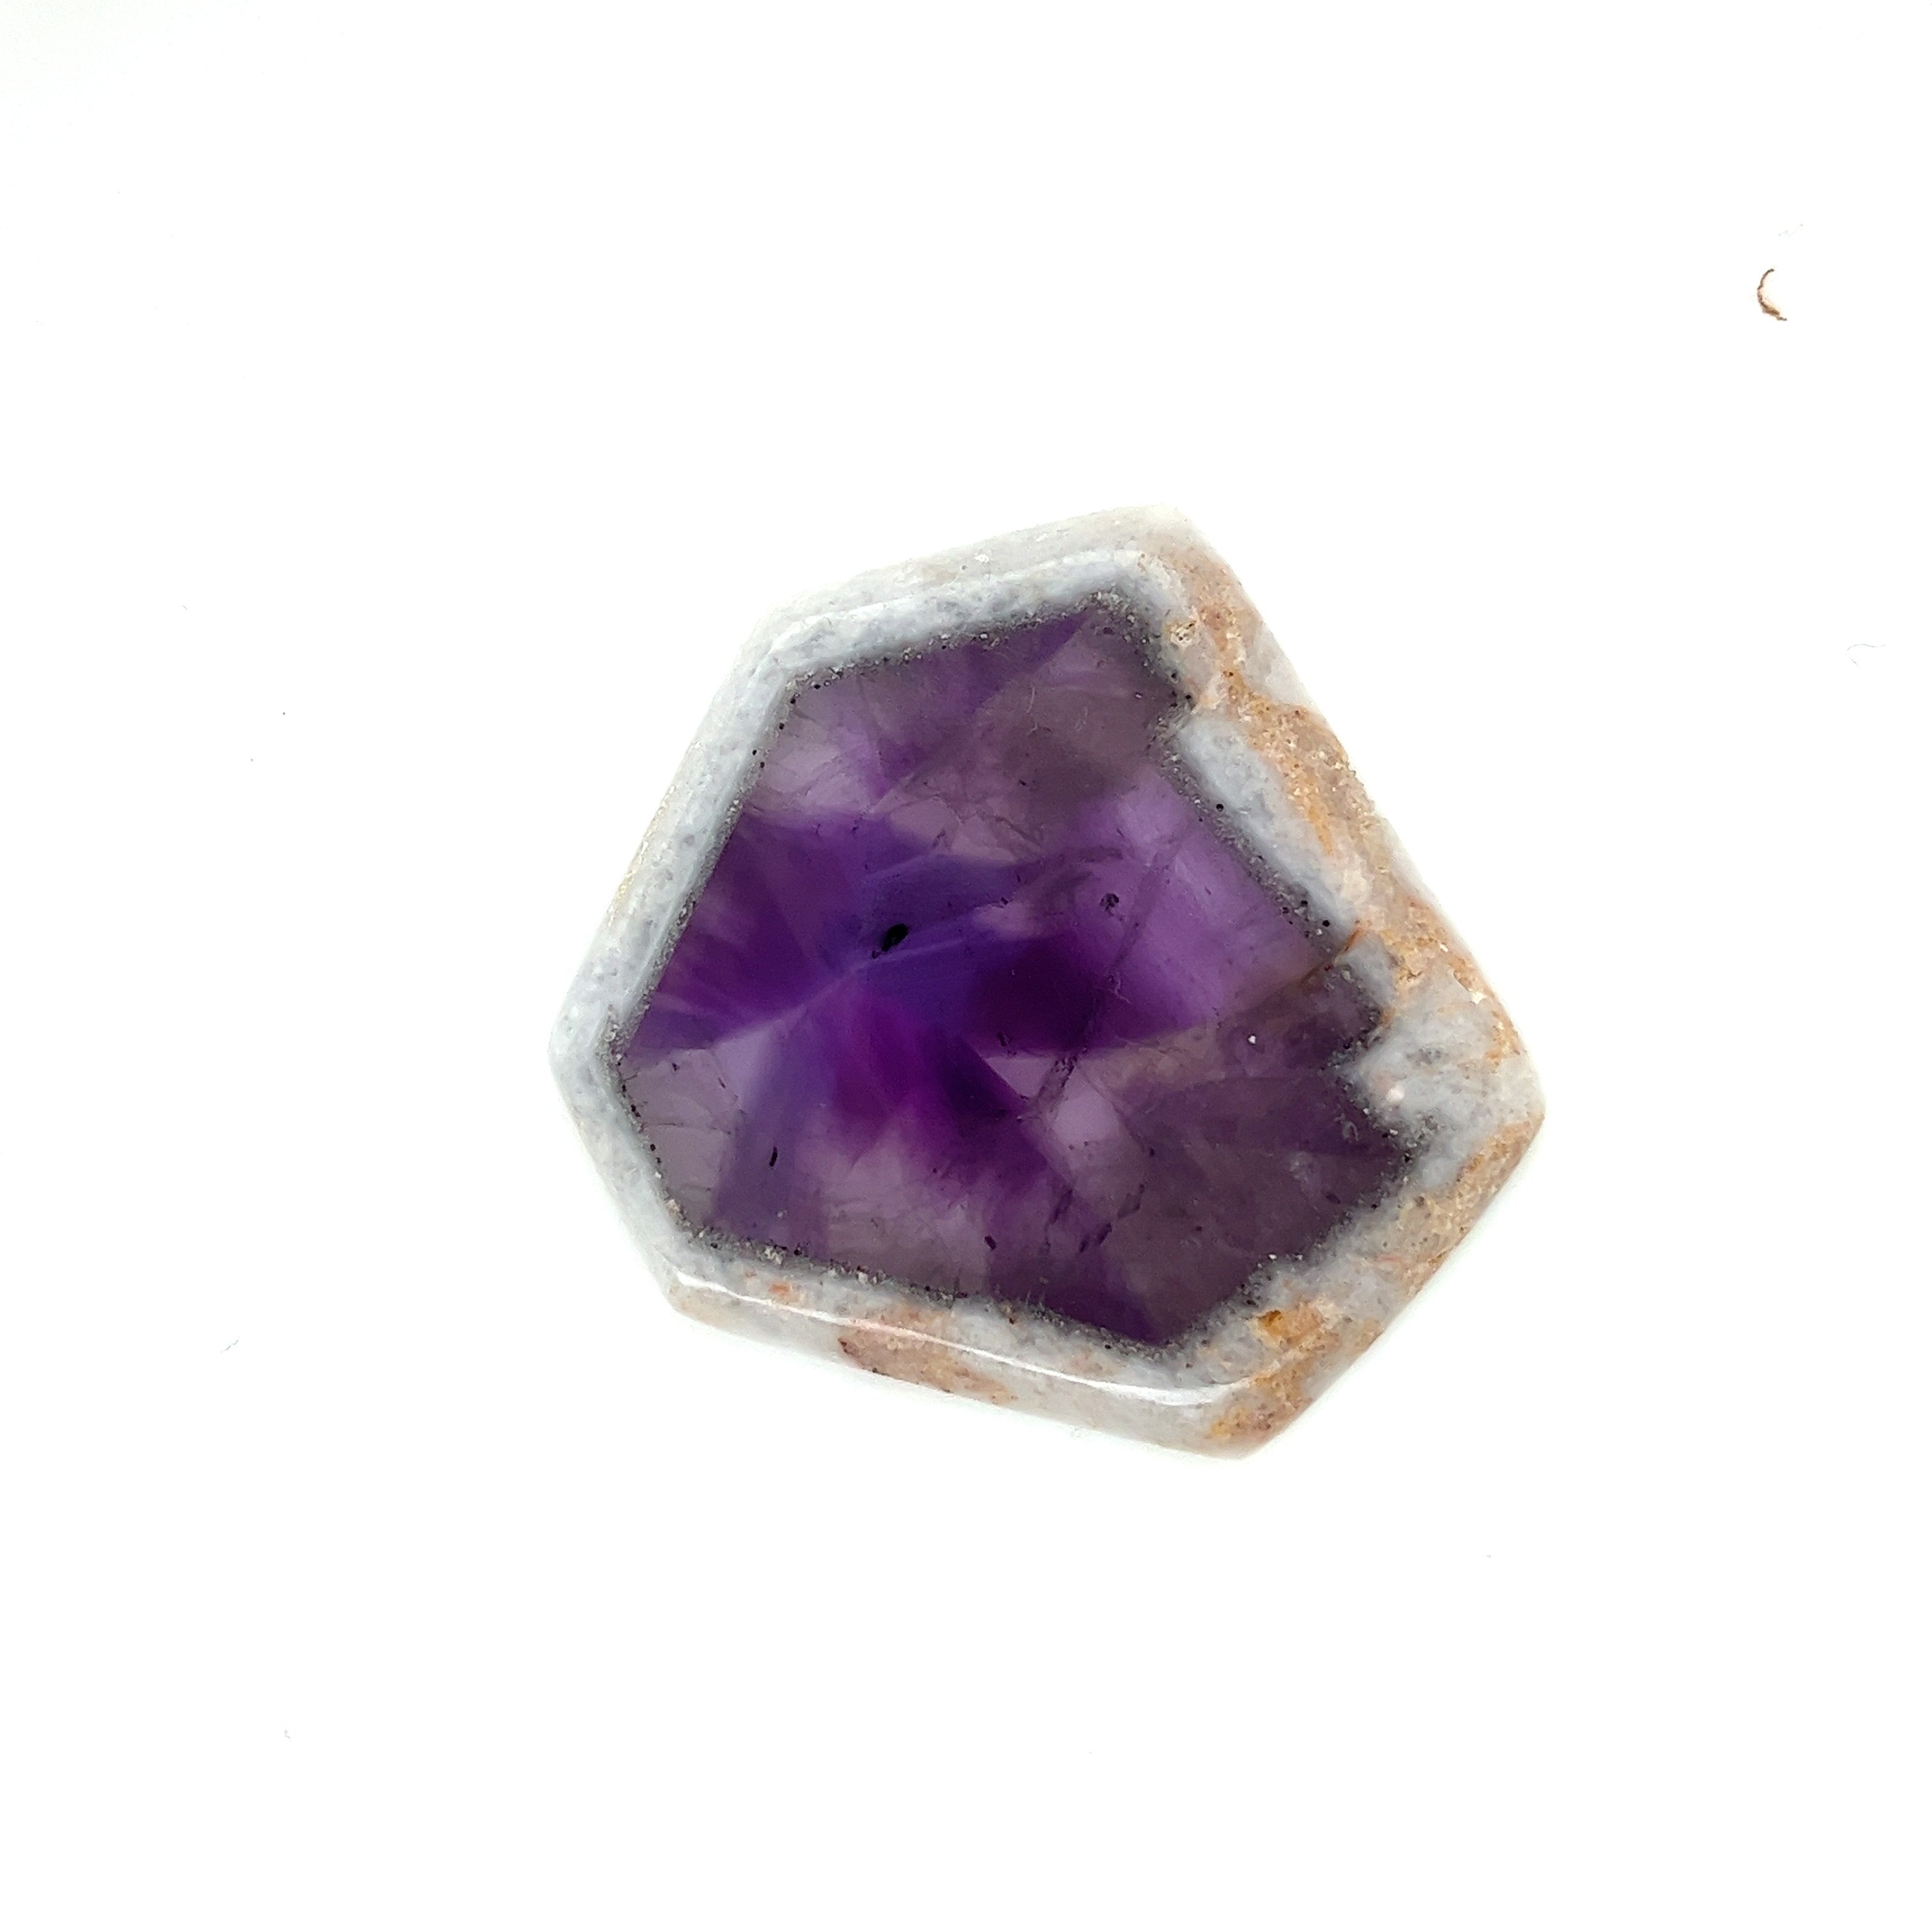 Trapiche Amethyst; Natural Untreated India Amethyst Slice, 21 grams - Mark Oliver Gems